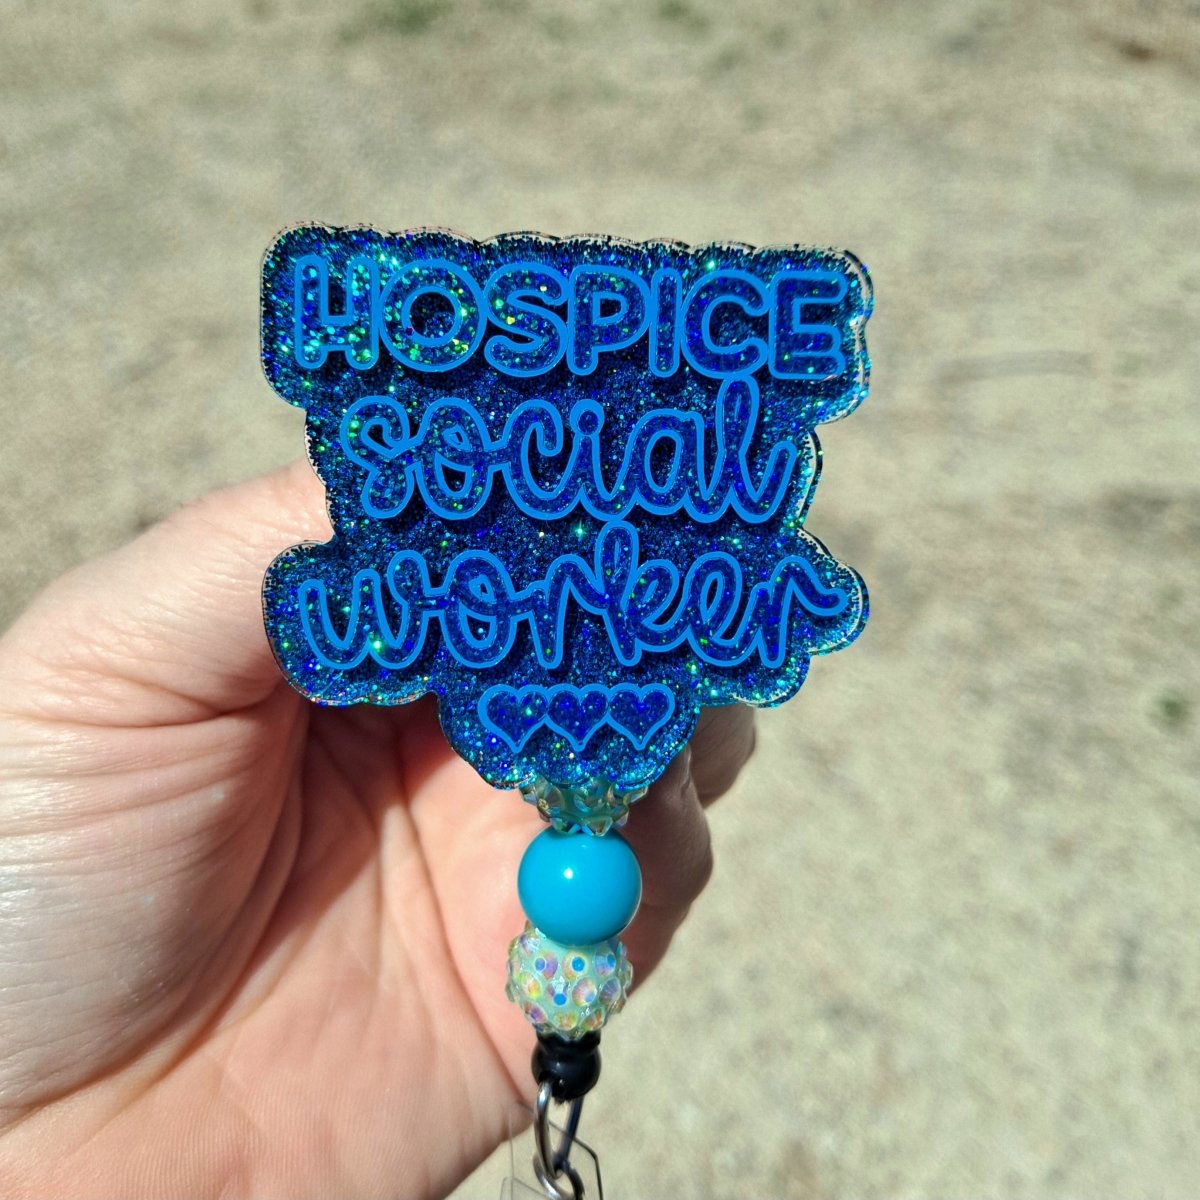 Hospice Social Worker Badge Reel - The Badge Boutique Co